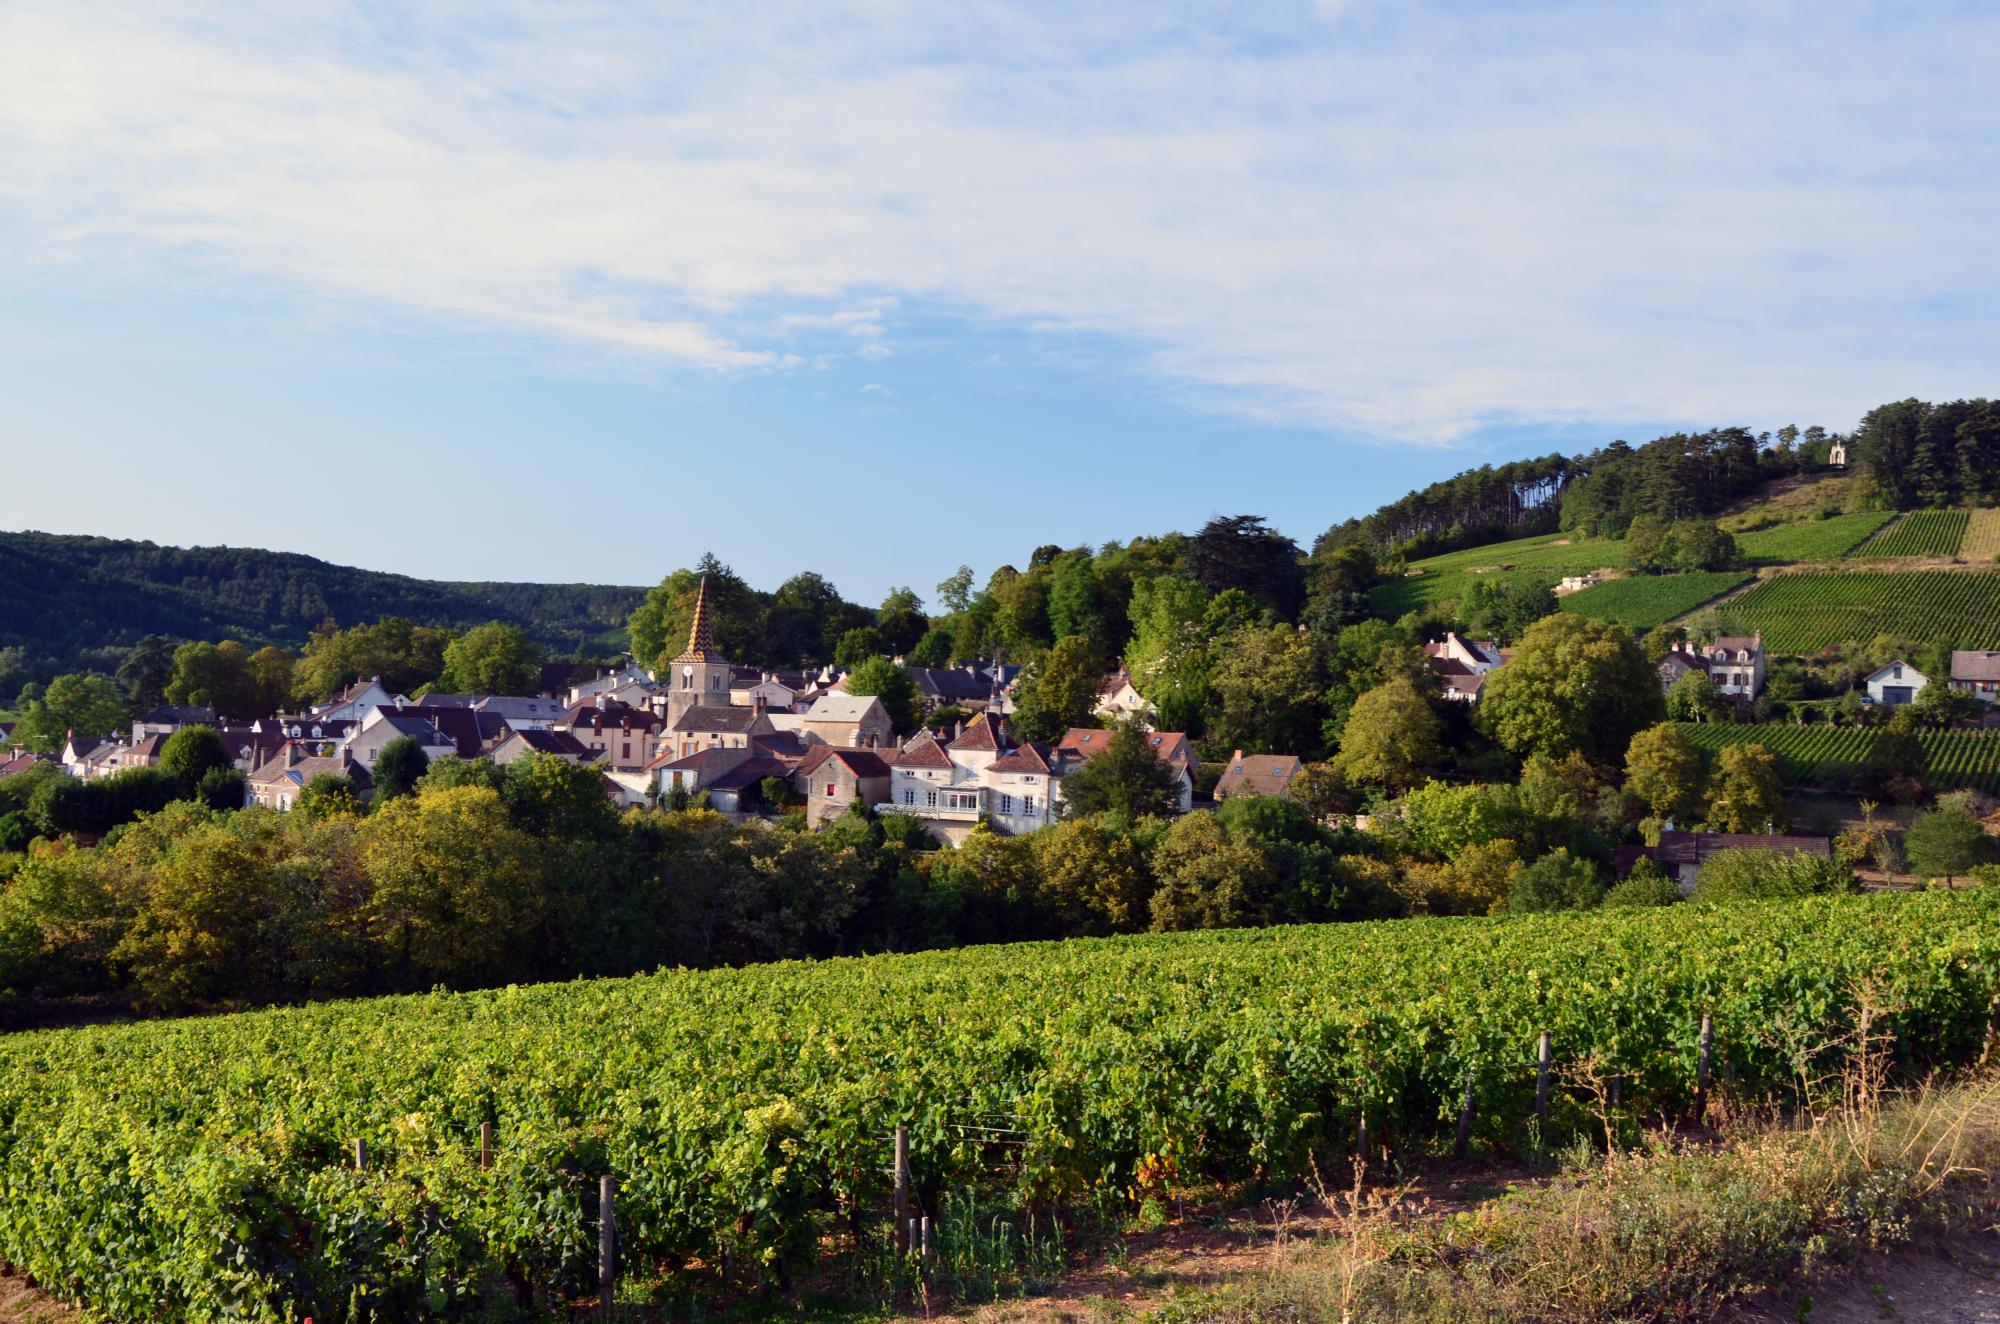 Discover Burgundy - Vacation package : The Valley of Gastronomy Tour  - Land of France, travel agency in France